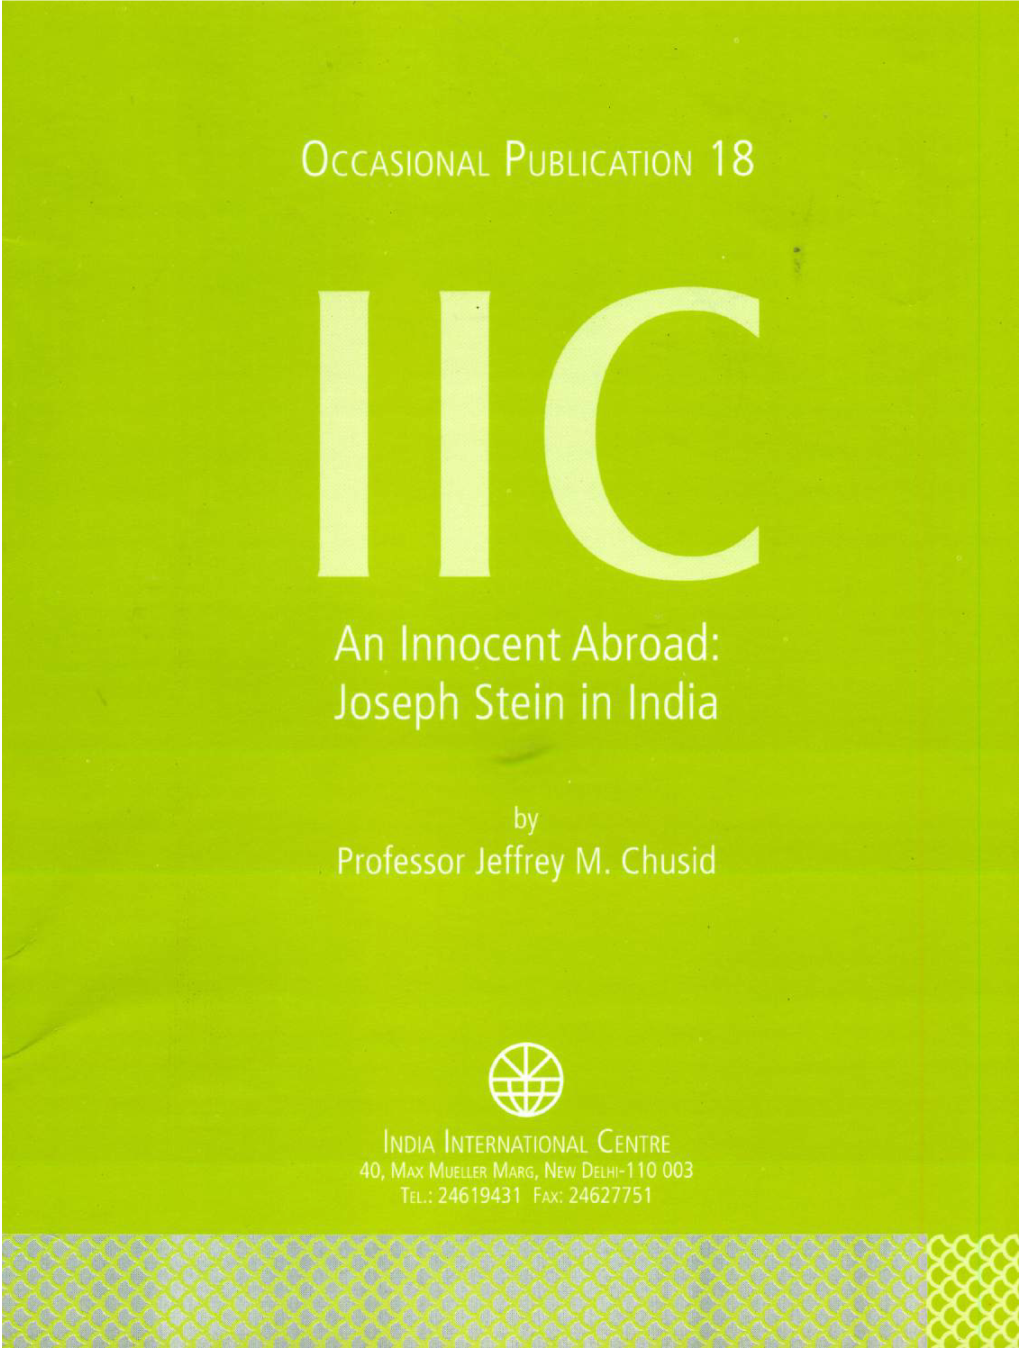 An Innocent Abroad: Joseph Stein in India the Views Expressed in This Publication Are Solely Those of the Author and Not of the India International Centre